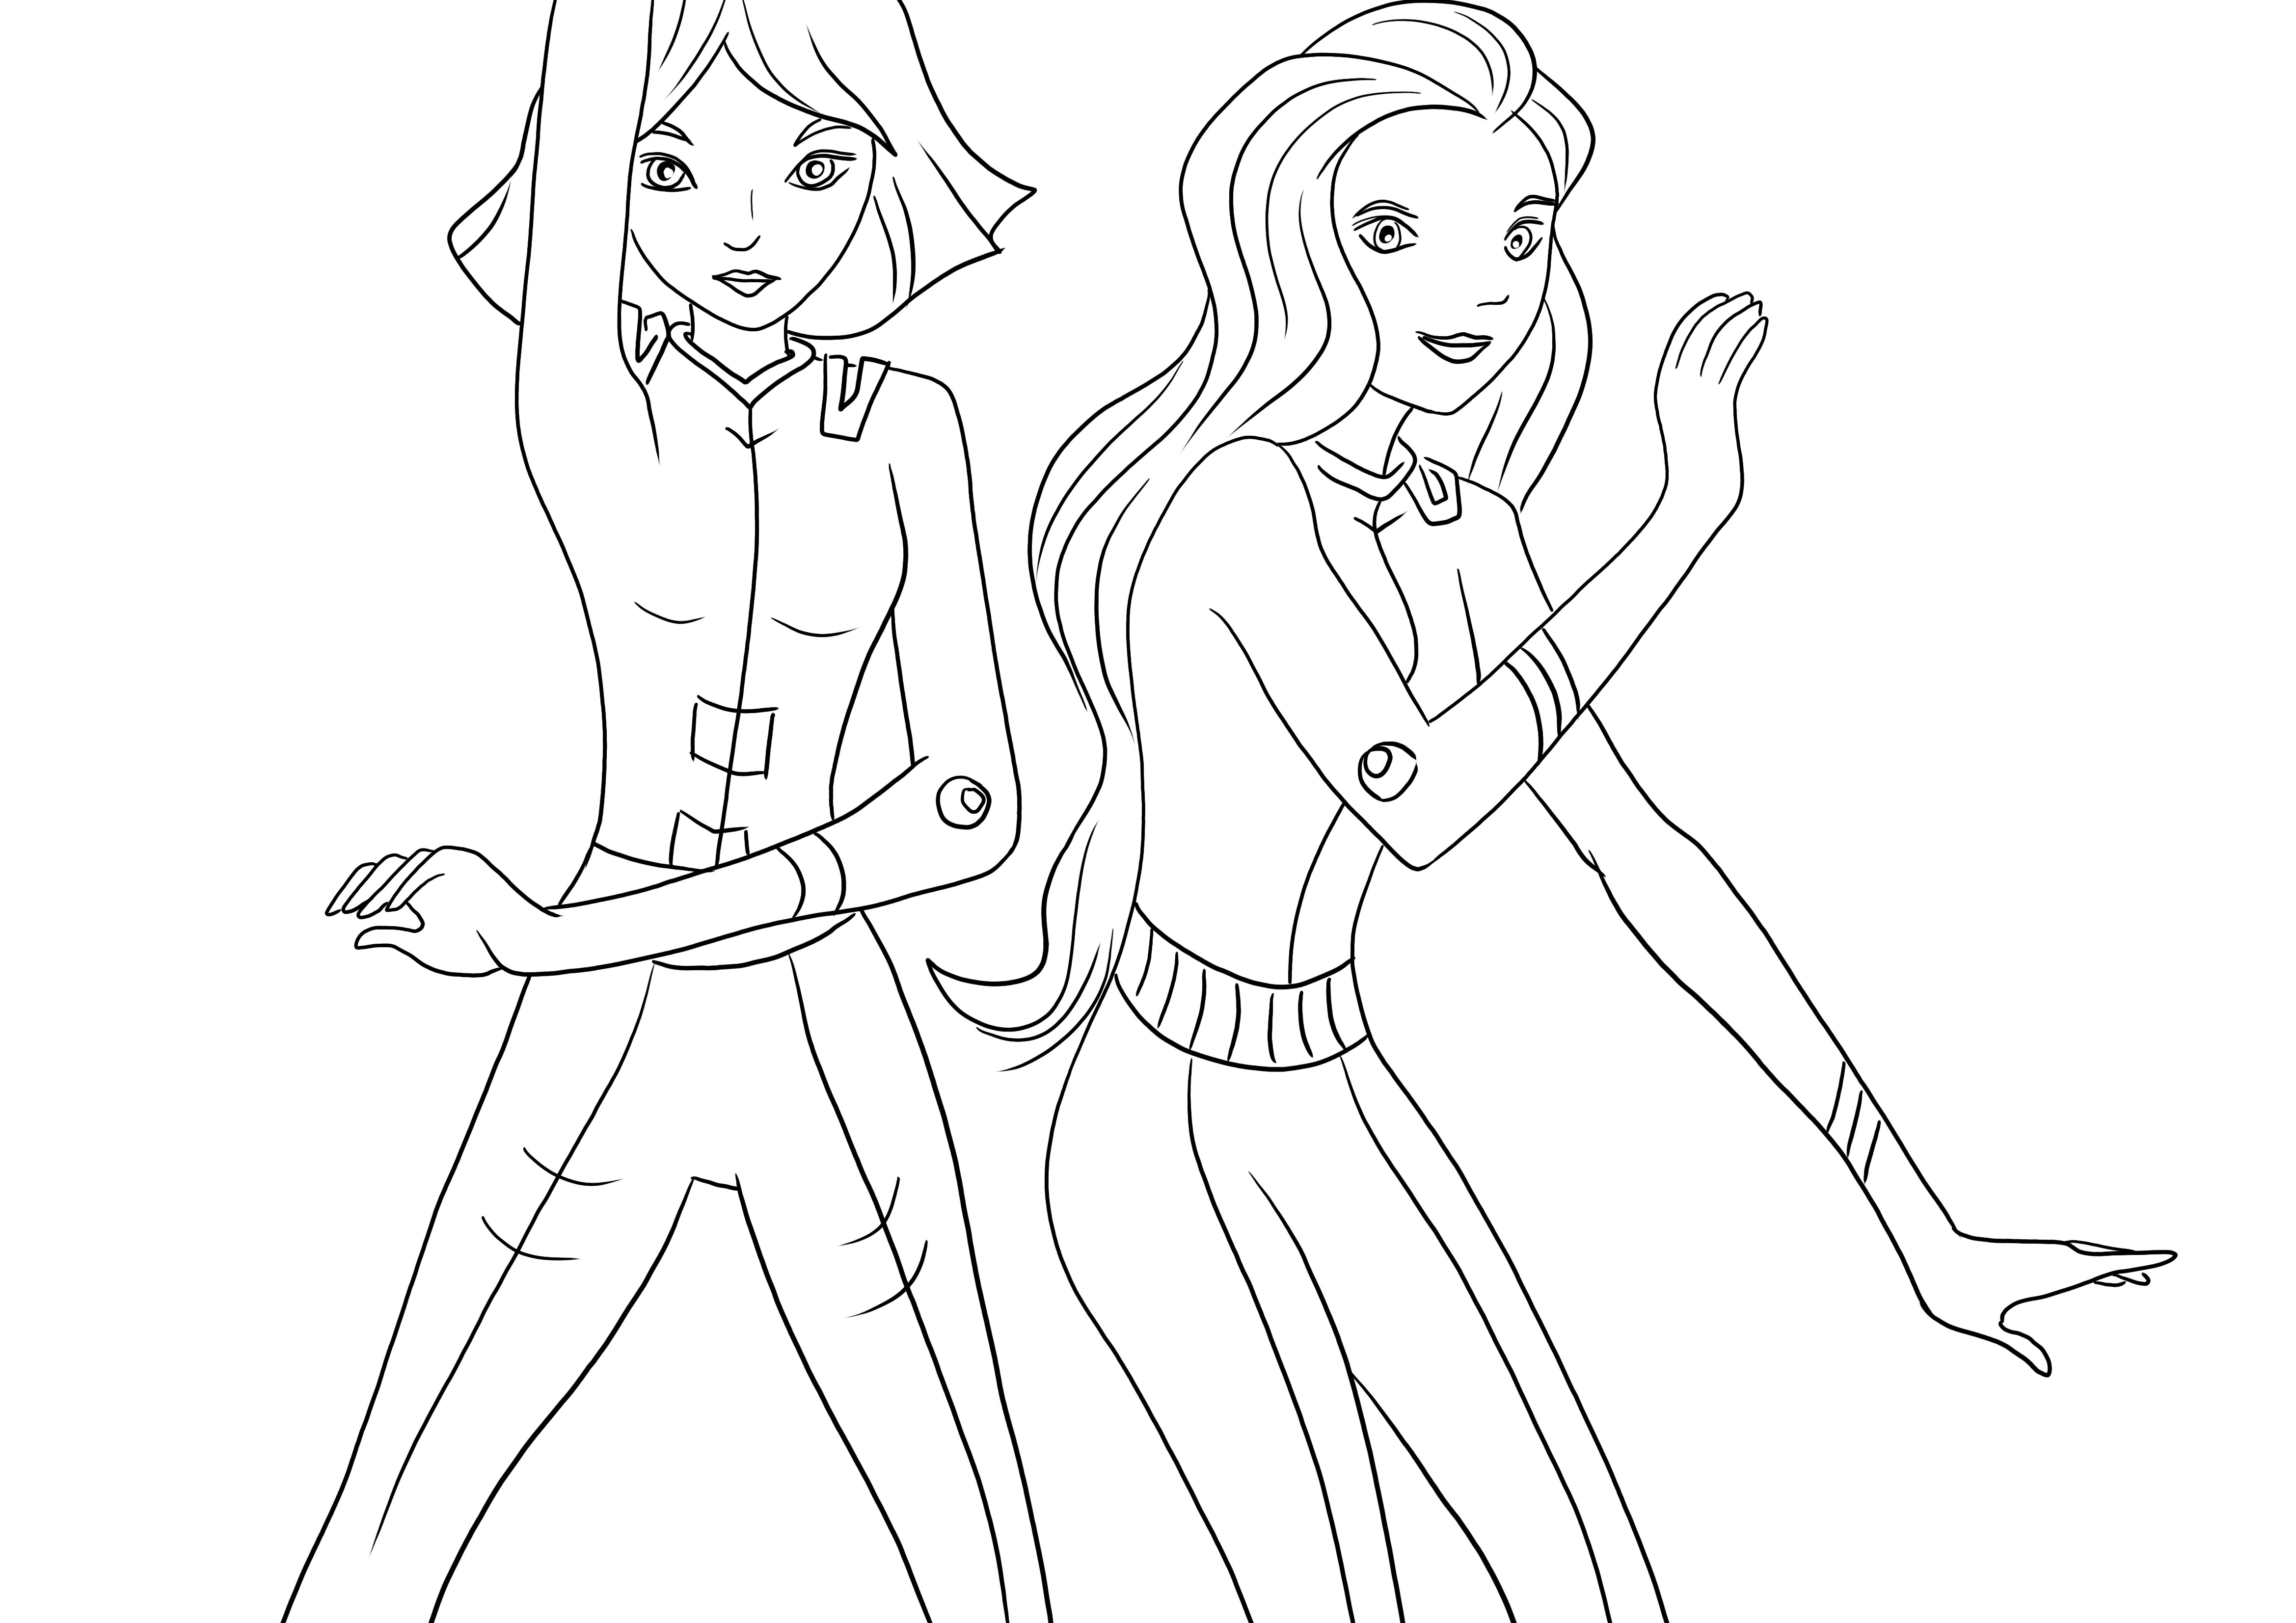 Samantha and Clover- free coloring image to download or print for kids